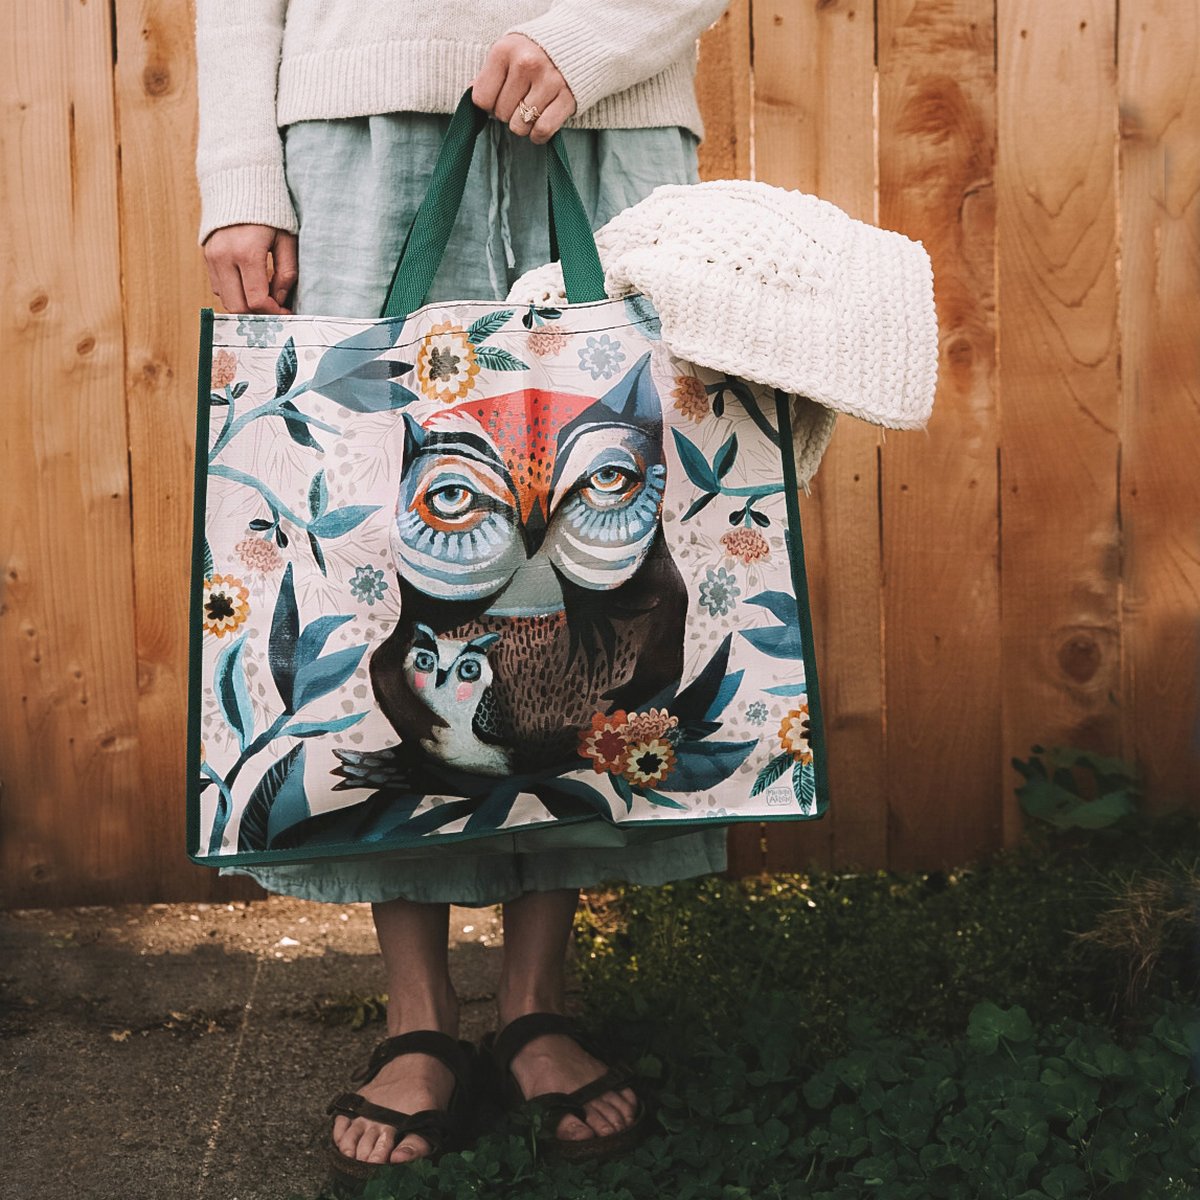 Owl Owlet Shopping Beach Bag - The Renmy Store Homewares & Gifts 